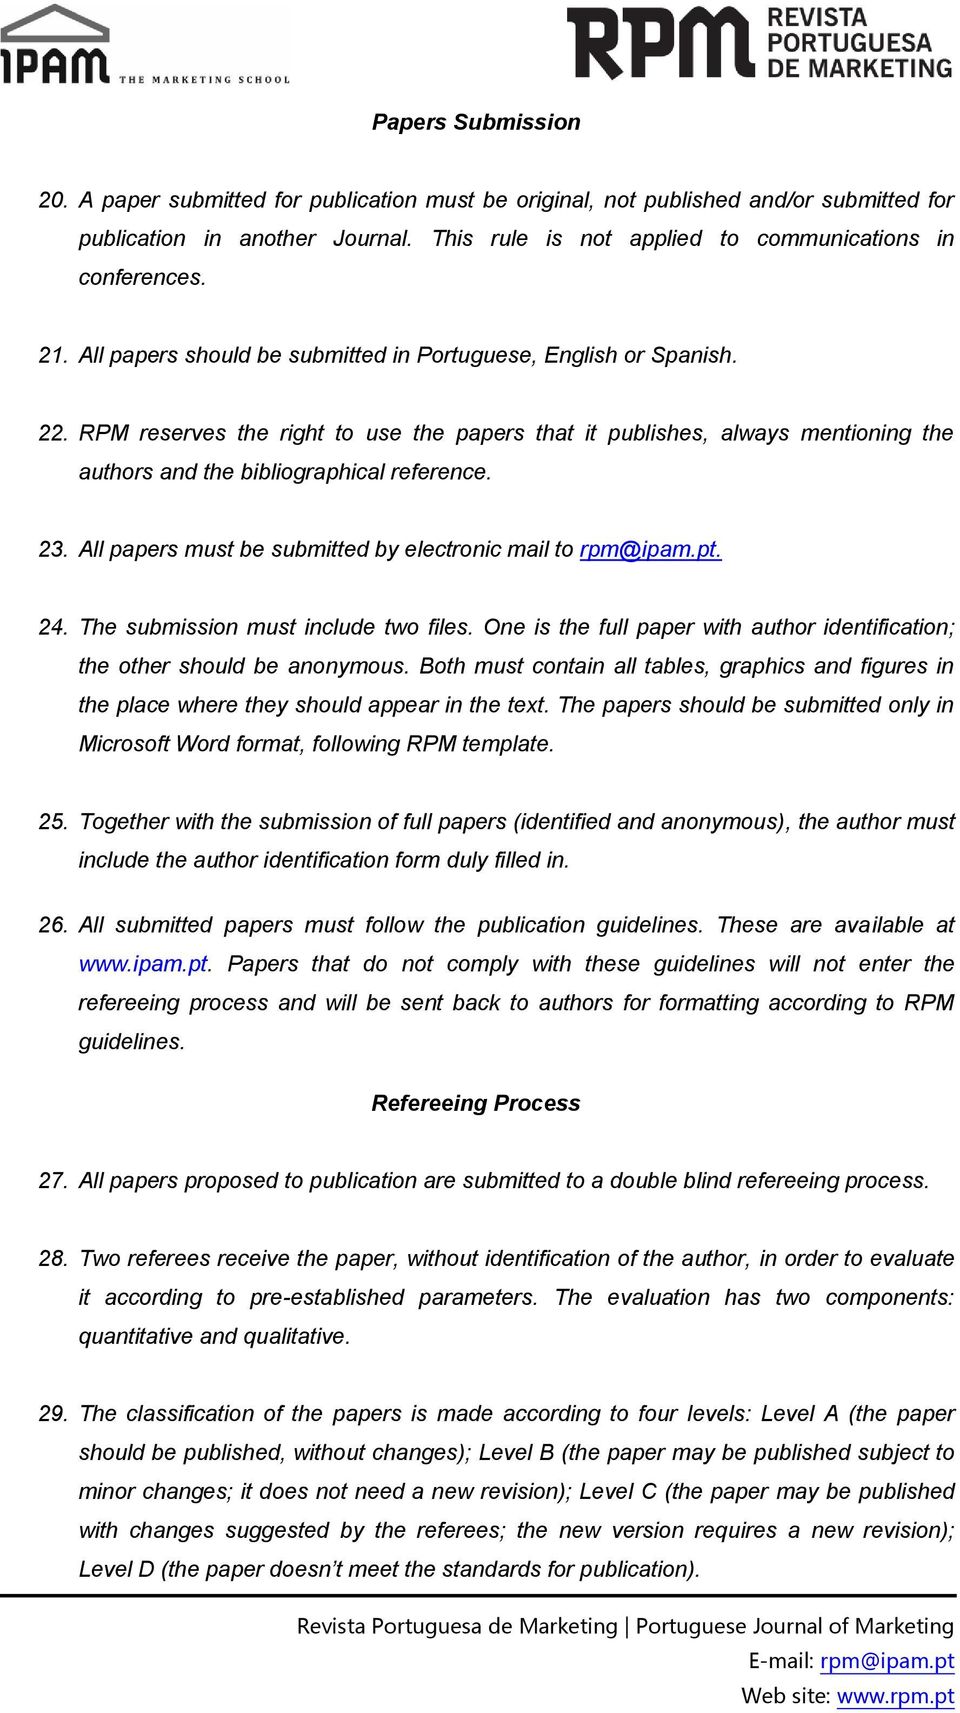 23. All papers must be submitted by electronic mail to rpm@ipam.pt. 24. The submission must include two files. One is the full paper with author identification; the other should be anonymous.